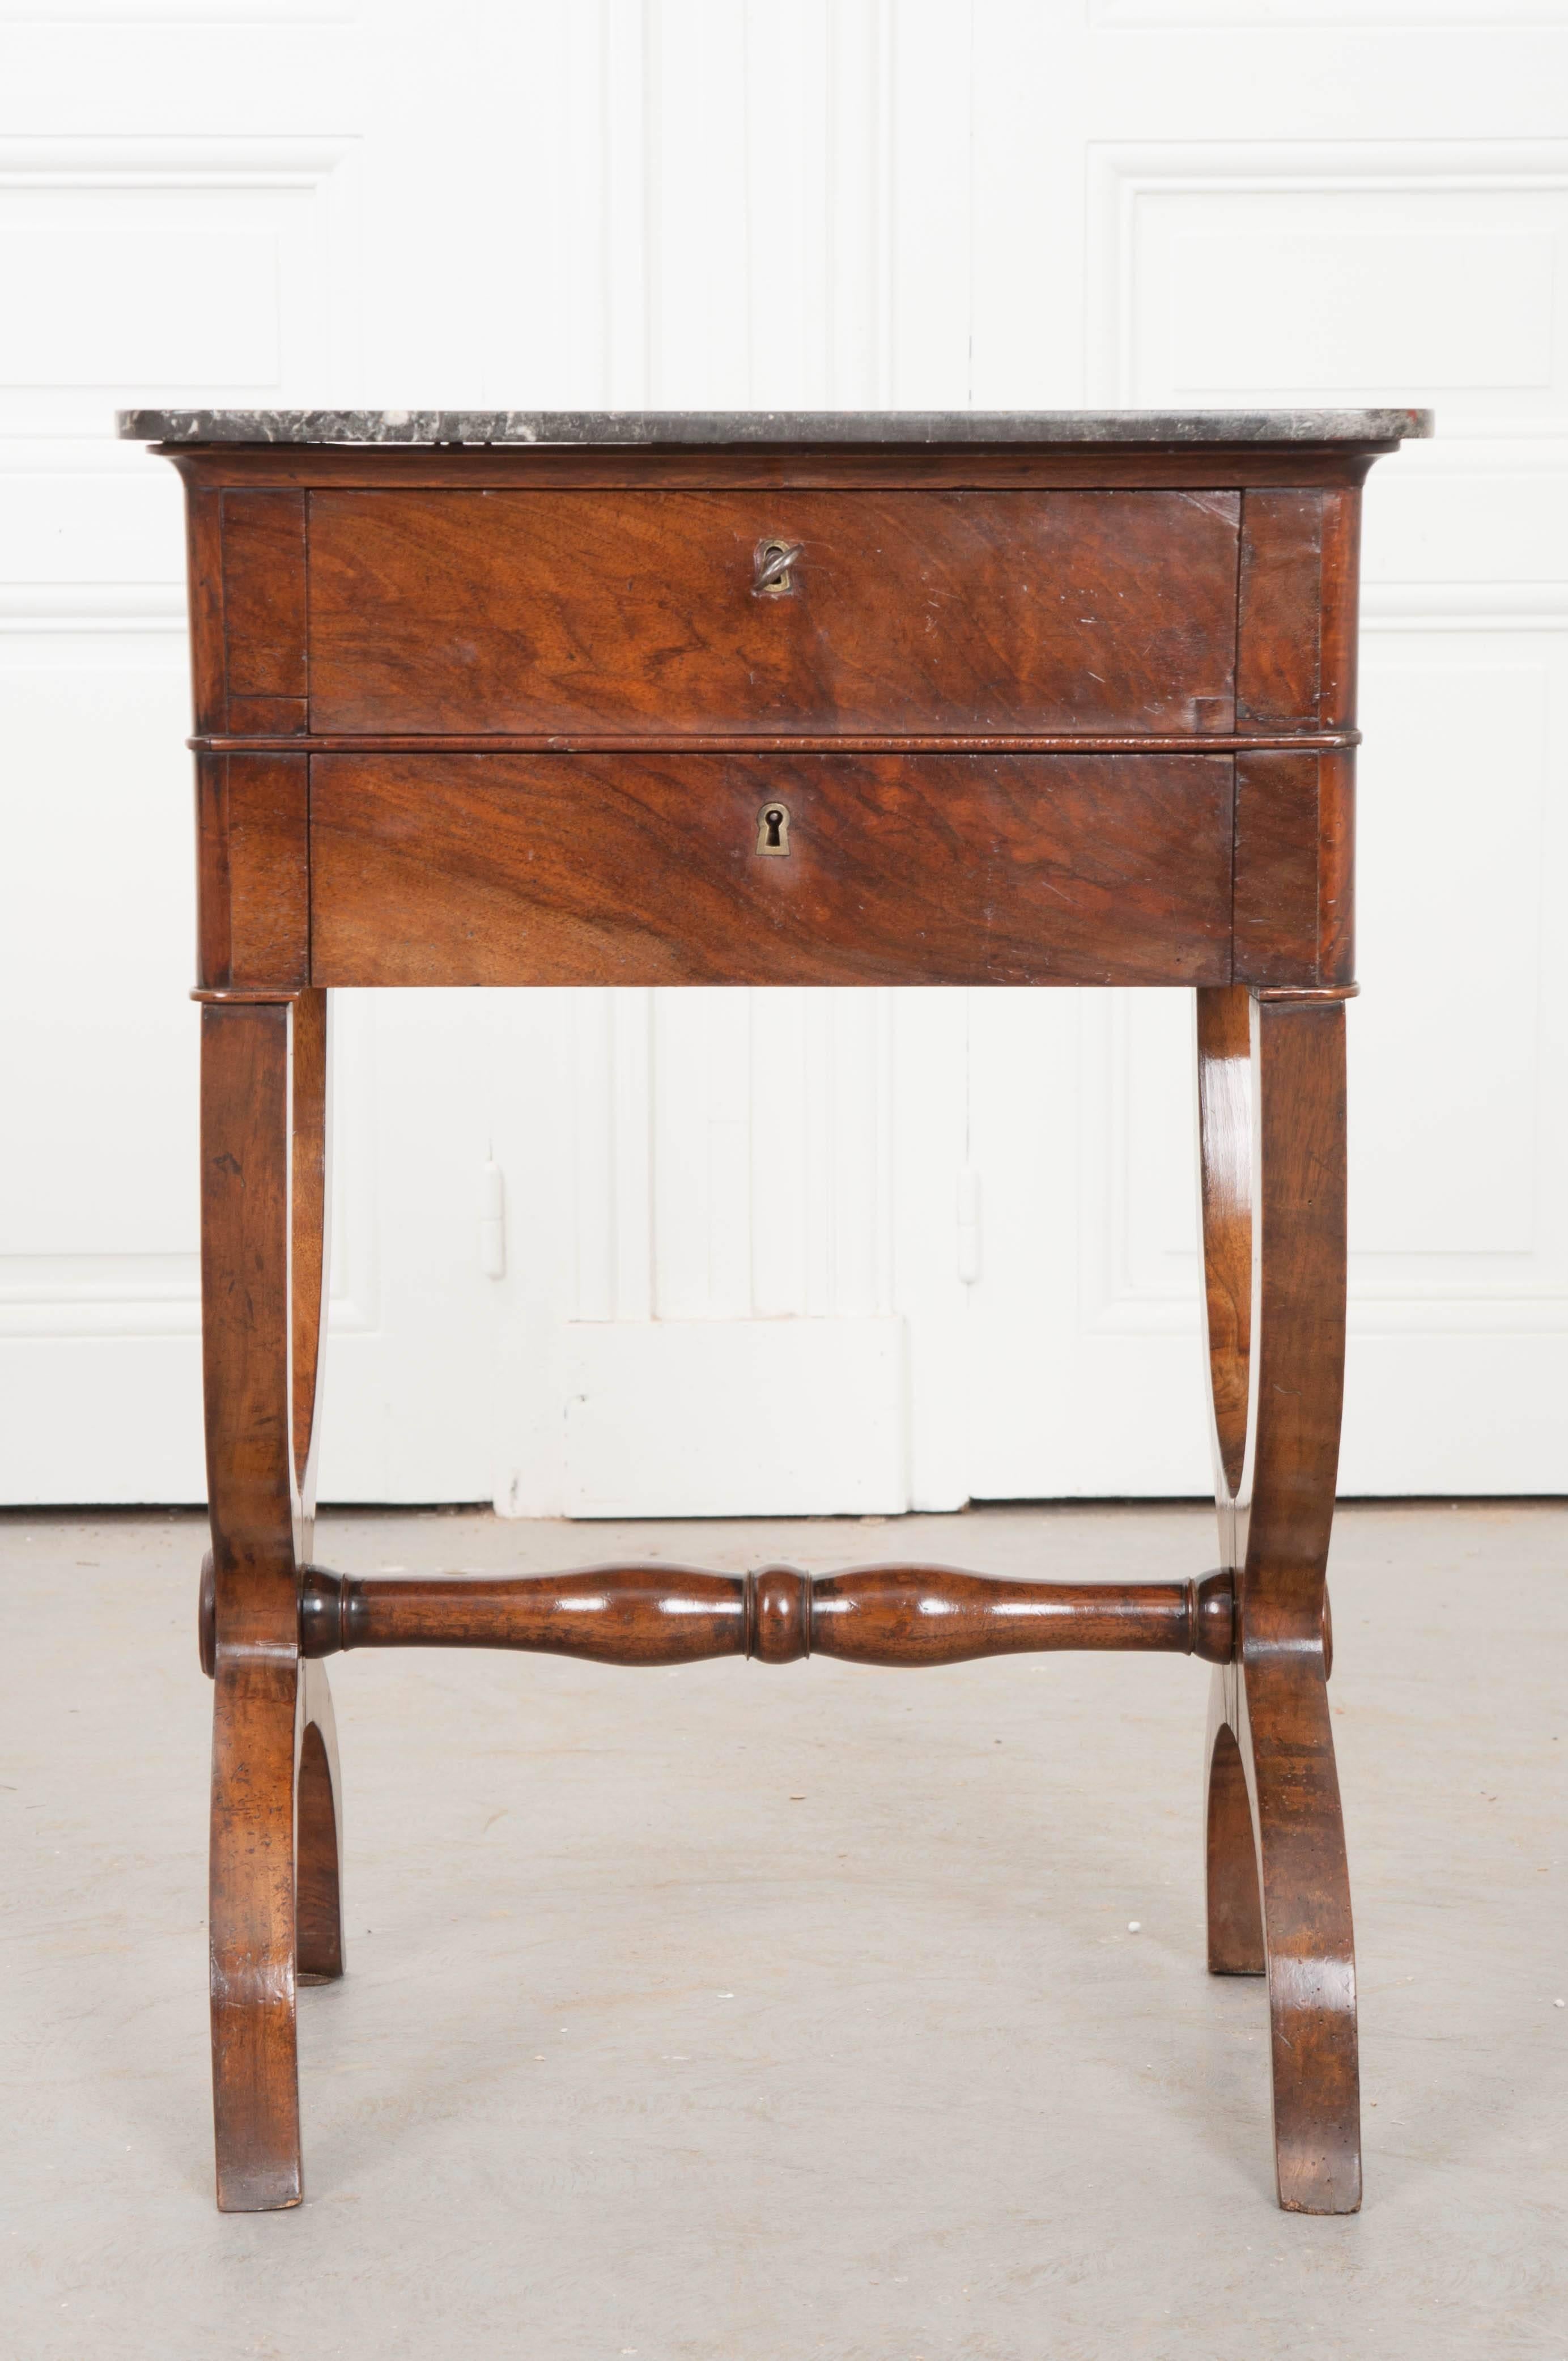 A delightful marble top table, with beautiful walnut veneer and interesting design from 19th century, France. The table has two stacked drawers, each with working locks, facilitating securable storage. The table is lifted by amazing Curule legs that